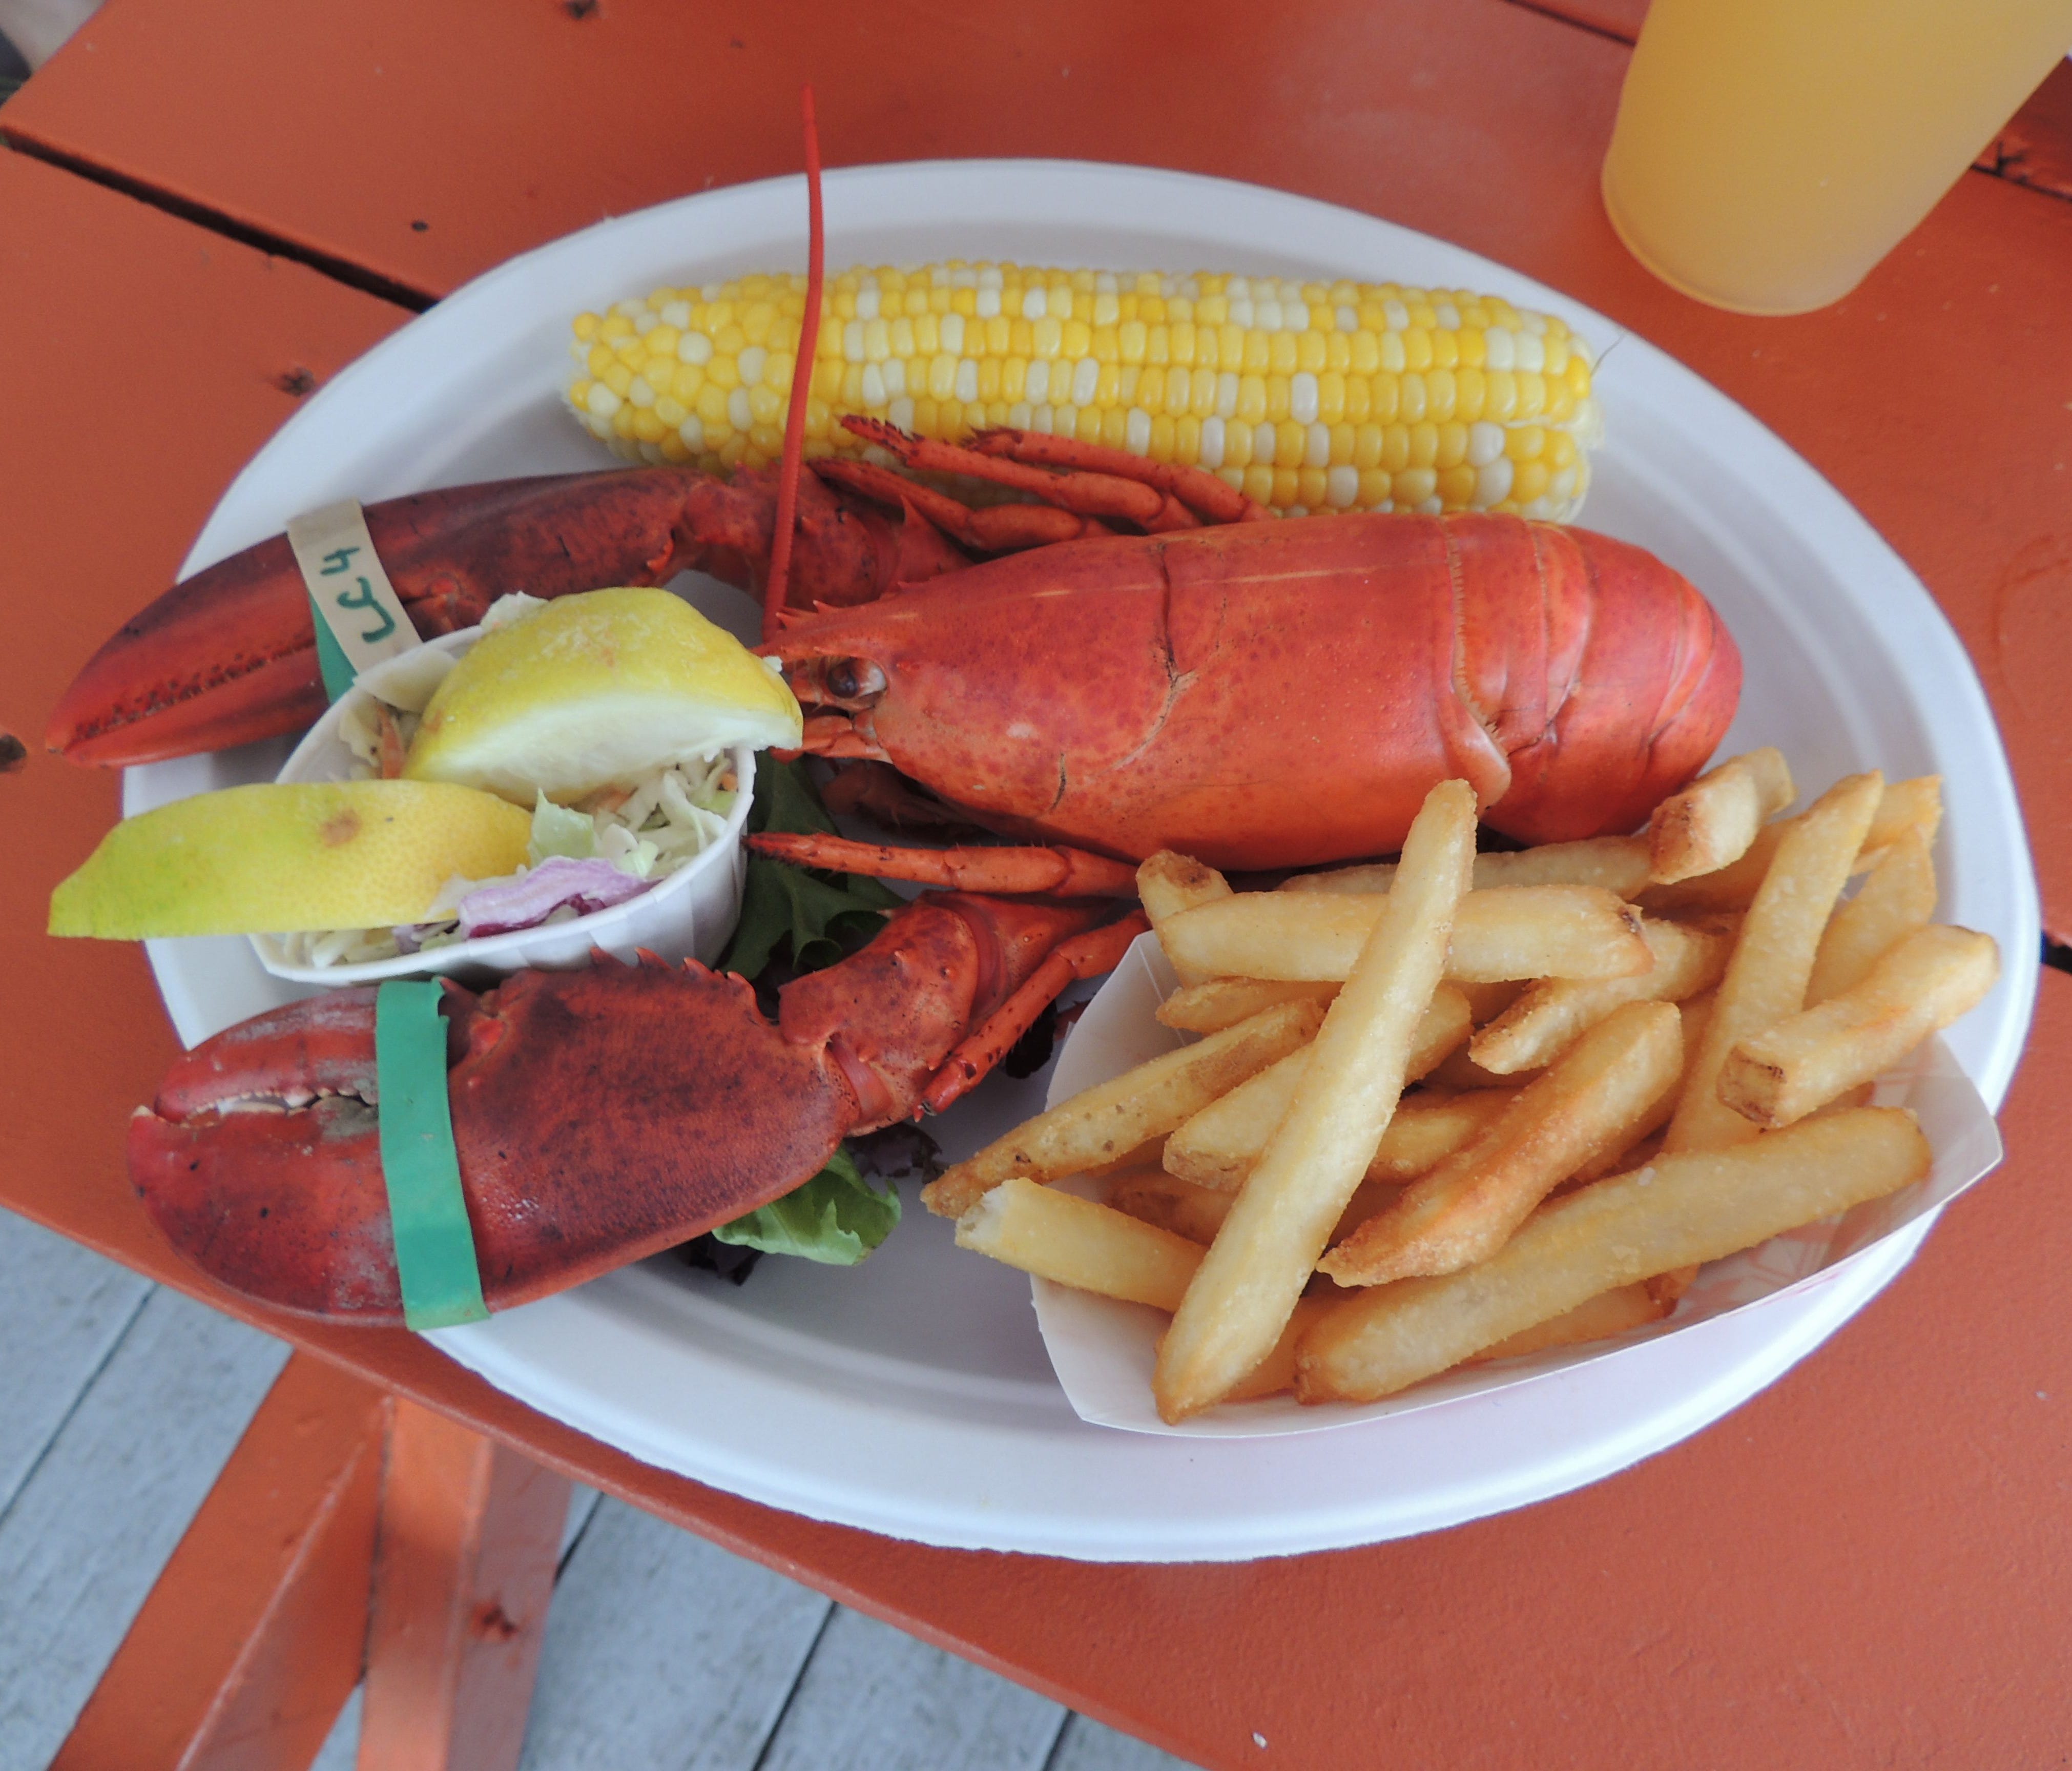 The same classic lobster dinner plate is served with a more common hard-shelled lobster and fries in other months.